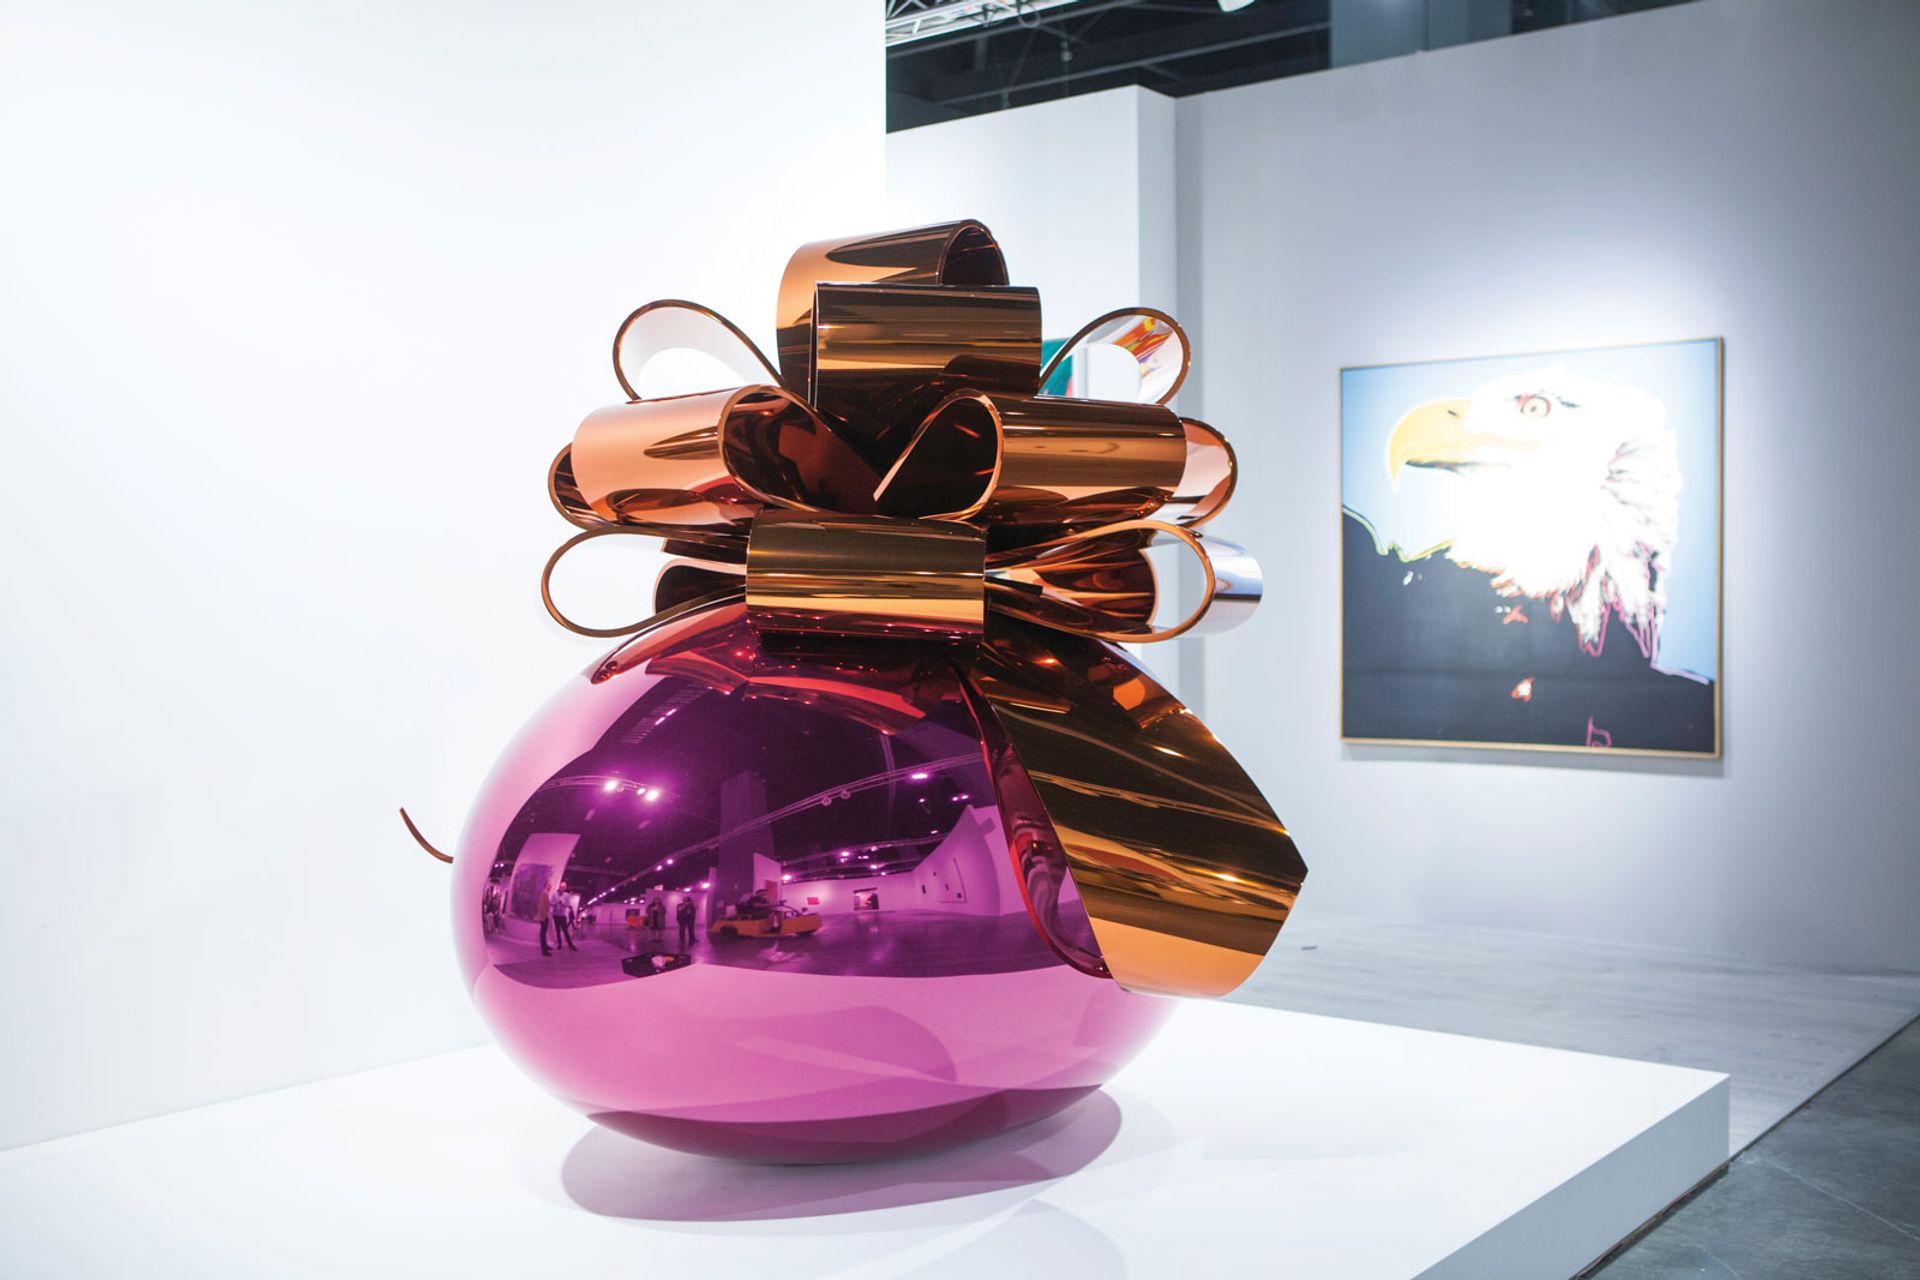 Blue chip works, like Jeff Koons's Smooth Egg with Bow (Magenta/Orange) (1994-2009), could easily hit a state's "economic nexus" threshold for sales tax Photo:  © Vanessa Ruiz